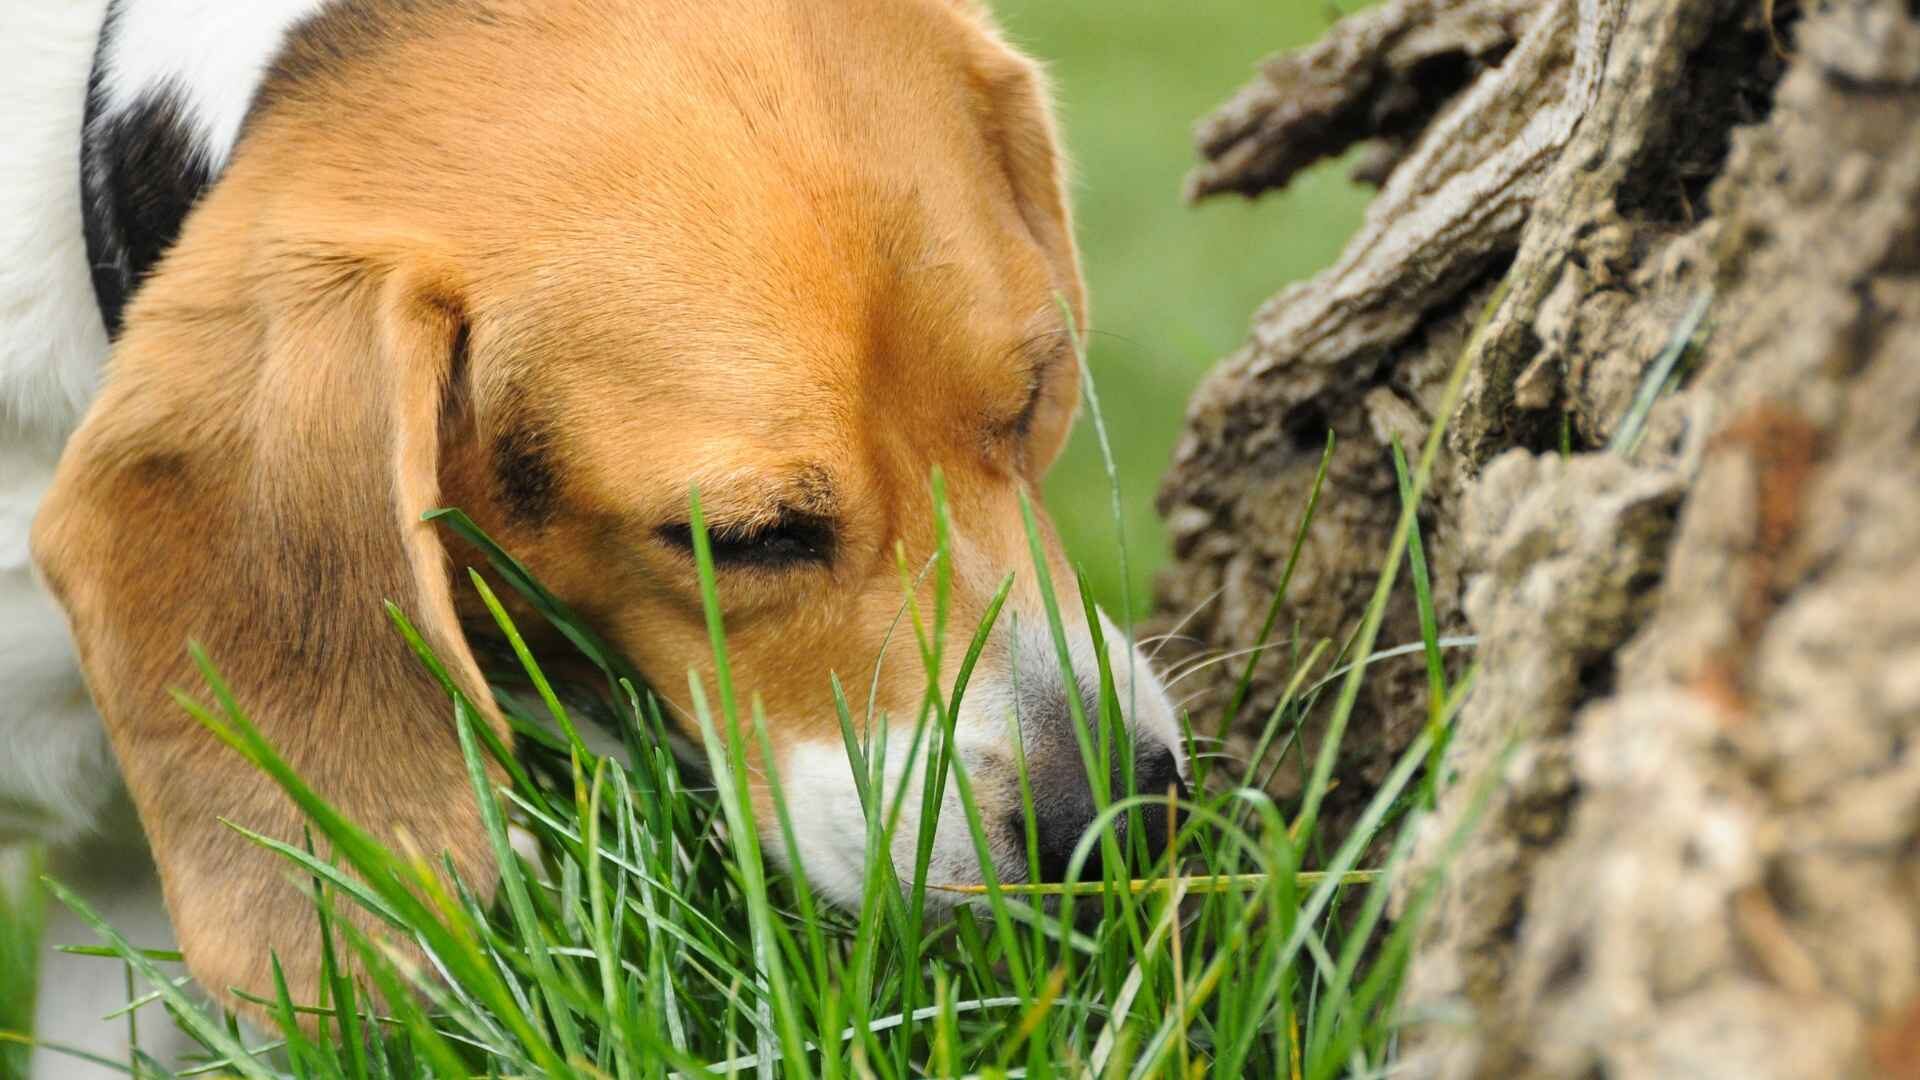 Why Does My Puppy Eat Leaves All of Sudden: Should I Worry?